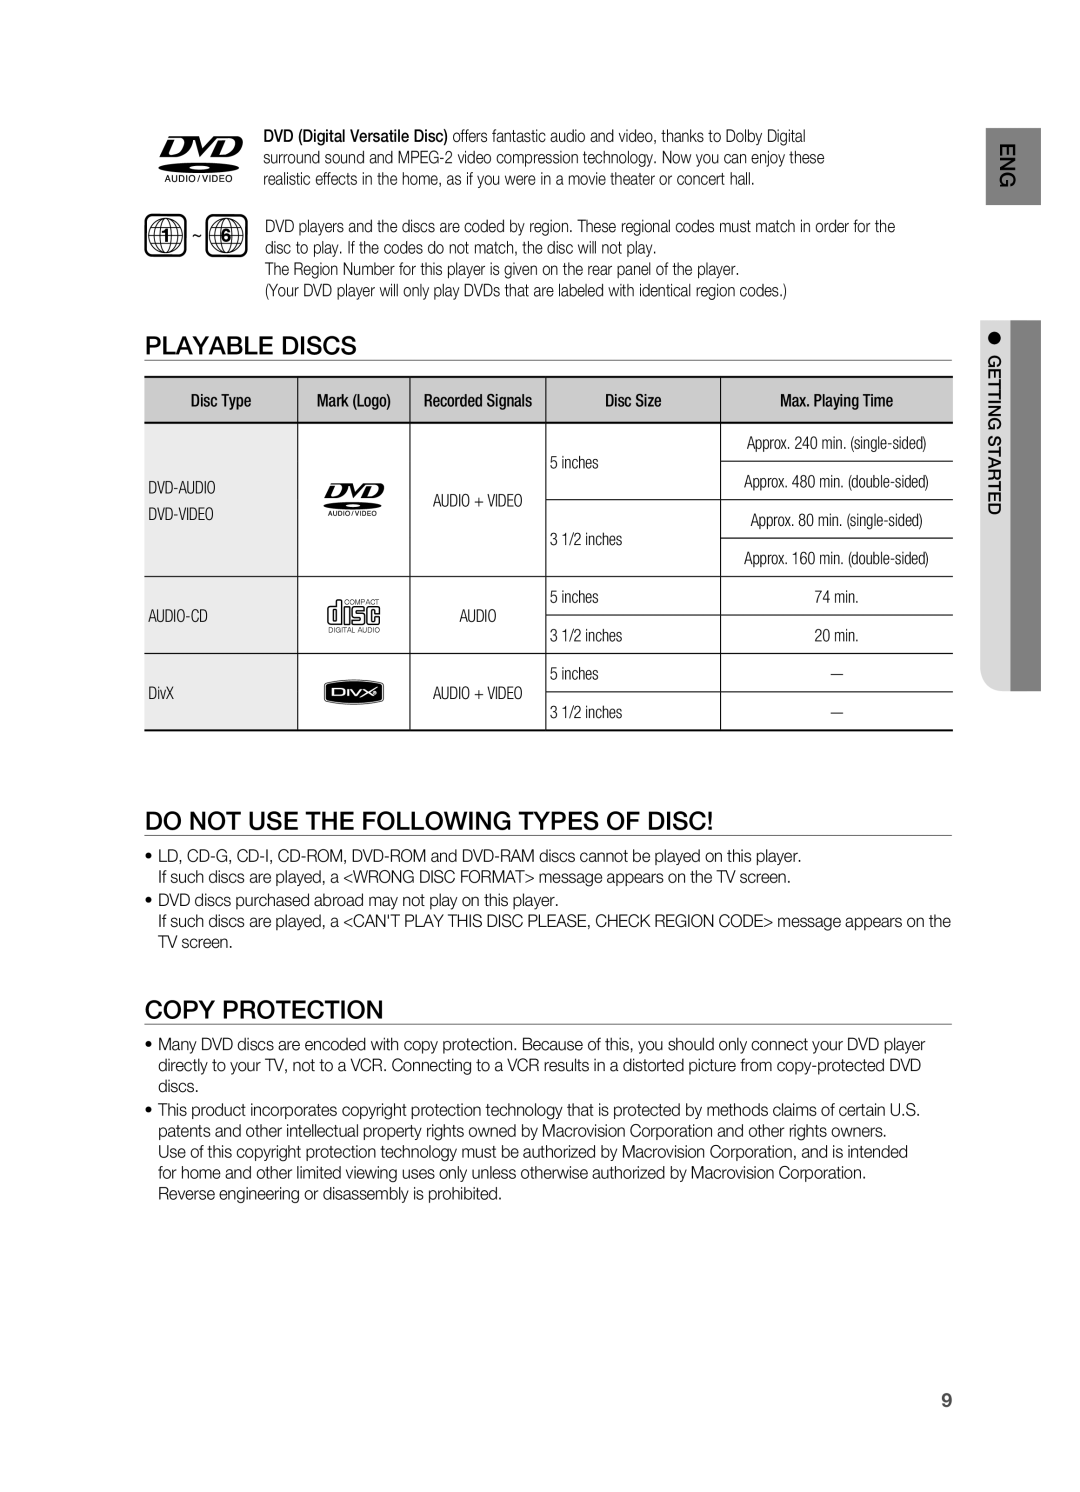 Samsung HT-TZ515 user manual Playable Discs, Do not use the following types of disc, Copy Protection 